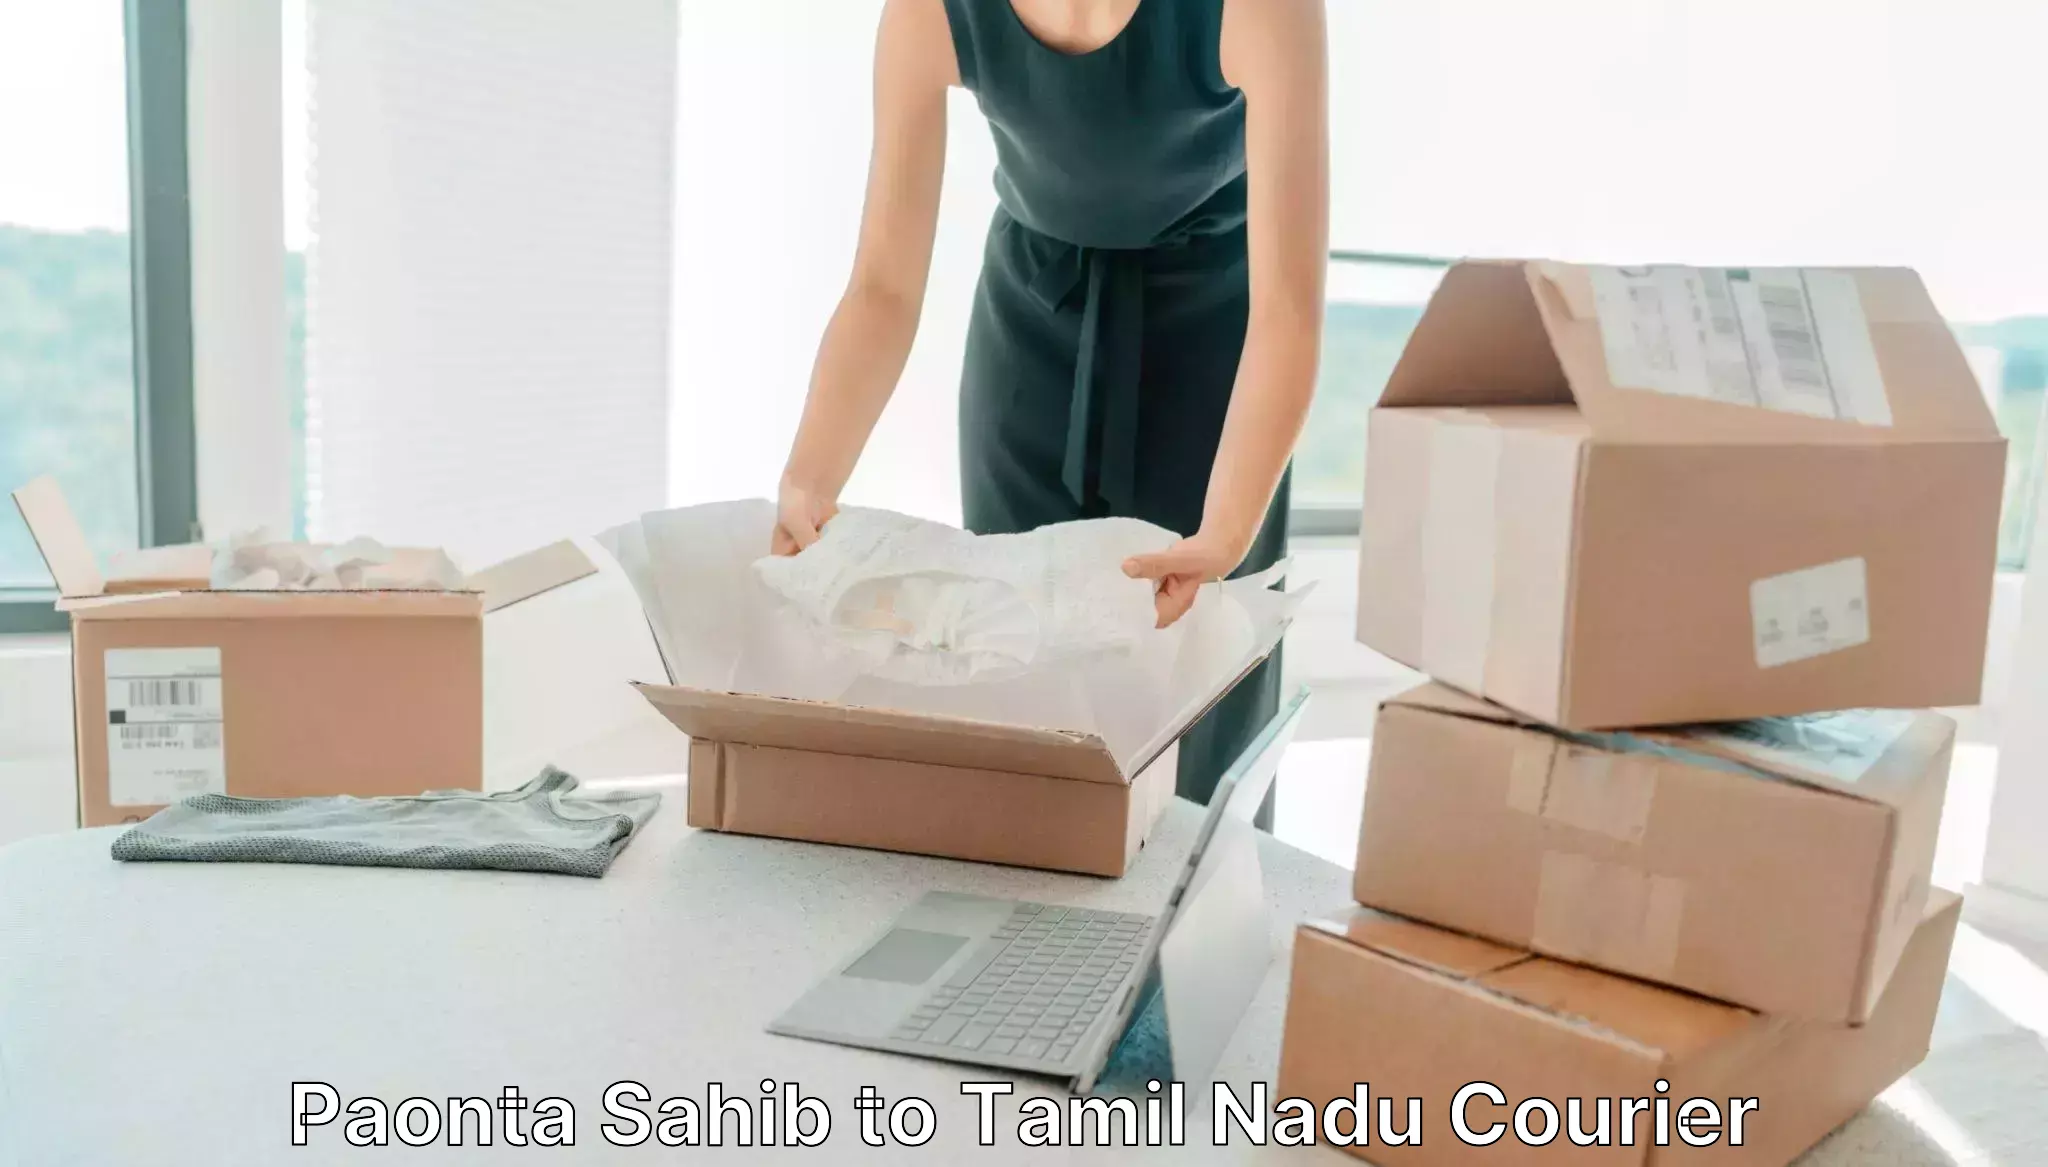 Courier service partnerships Paonta Sahib to SRM Institute of Science and Technology Chennai